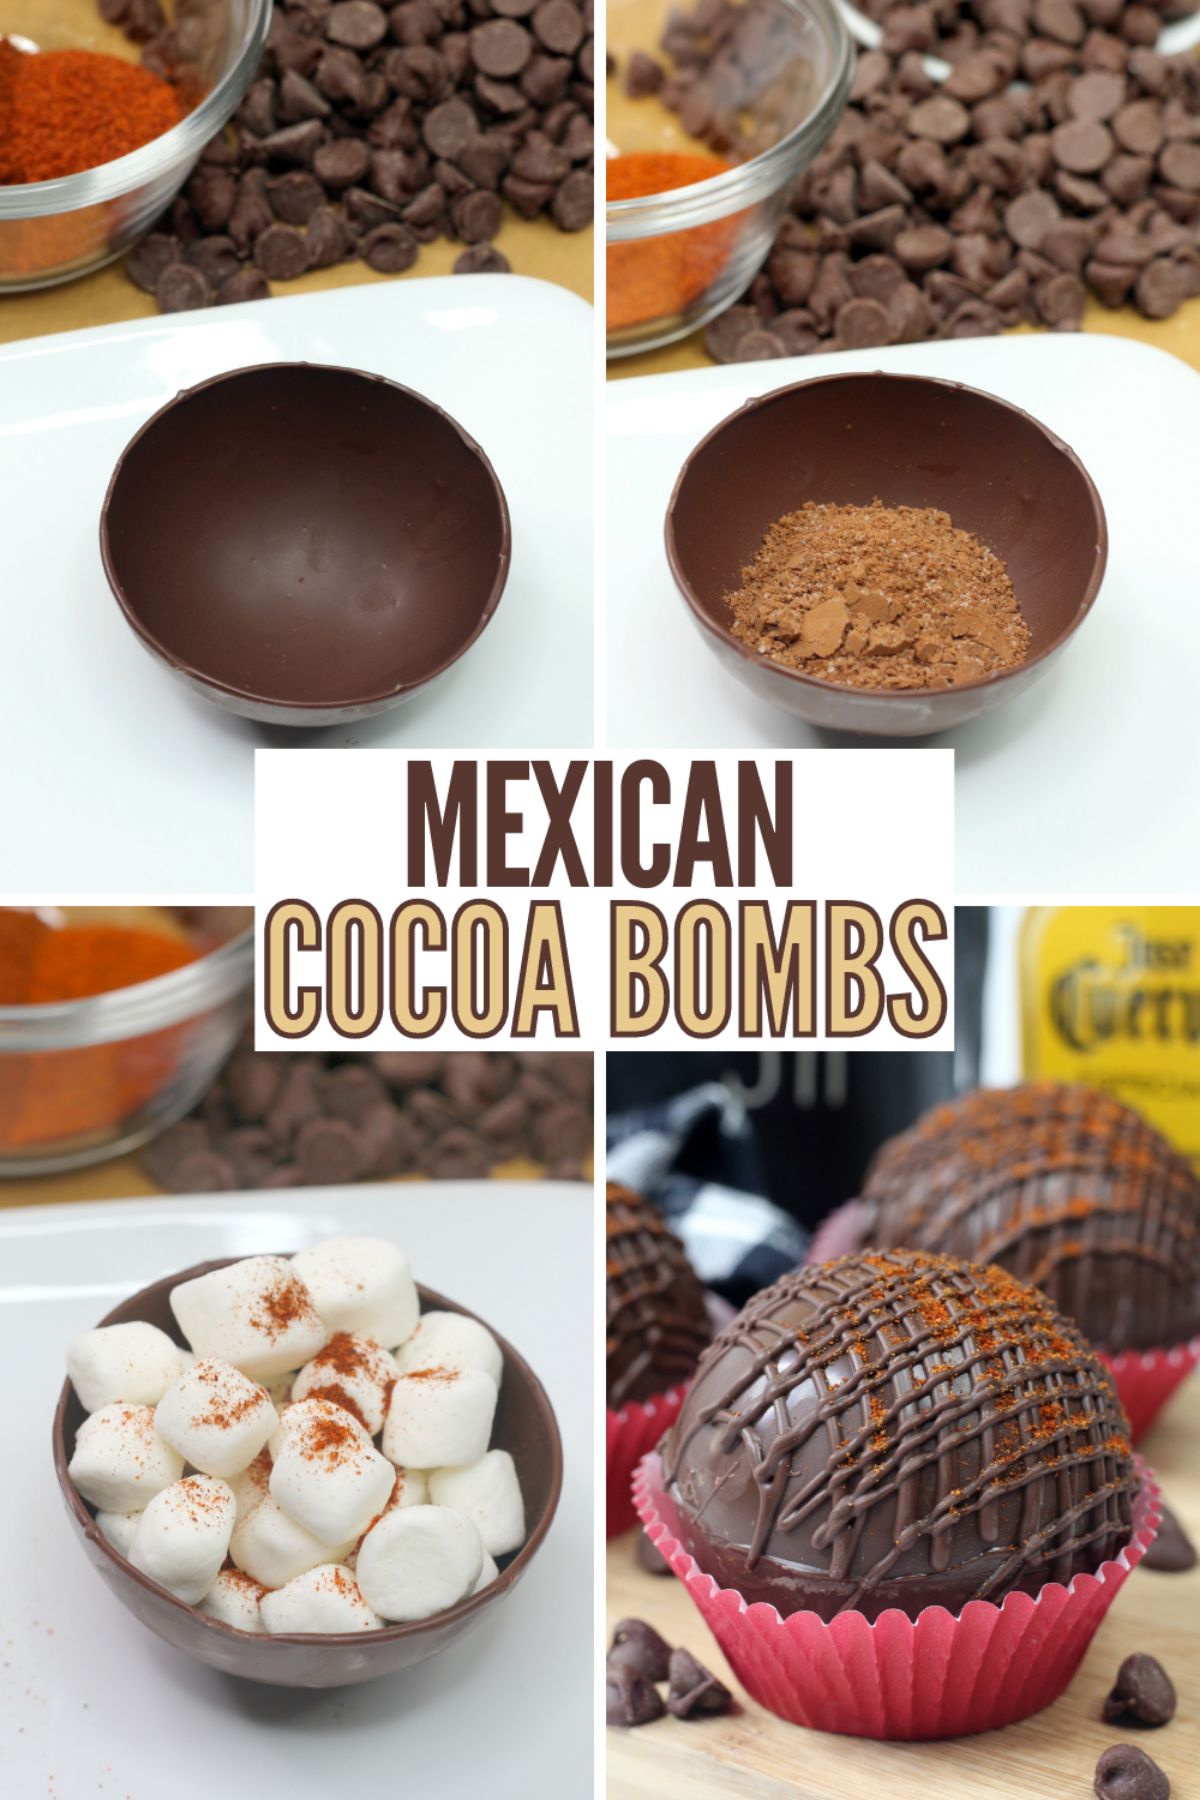 These Mexican Hot Cocoa Bombs are the perfect cup of spicy hot chocolate with an adult kick. It's a way to change up traditional hot cocoa! #mexican #hotcocoabombs #hotcocoa #cocoabombs #hotchocolate via @wondermomwannab